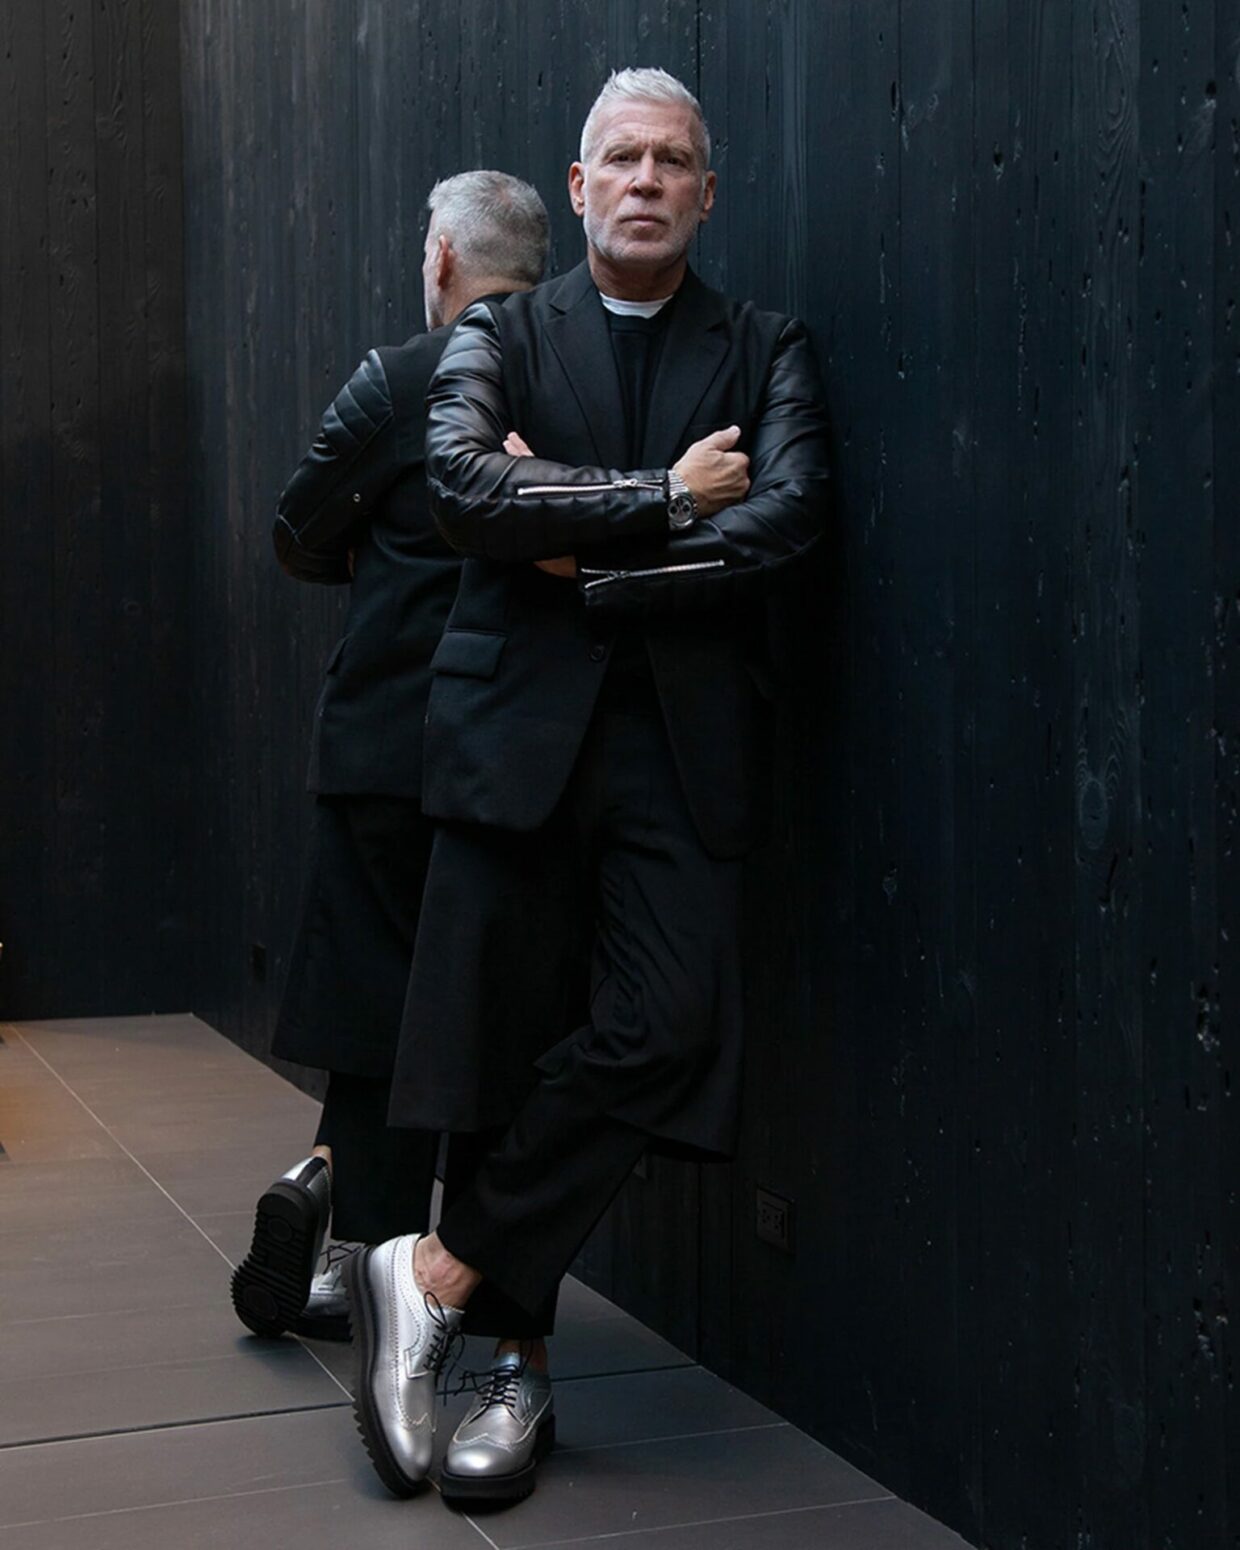 NICK WOOSTER ON THE ONITSUKA, JAPAN & SNEAKER CULTURE | 2